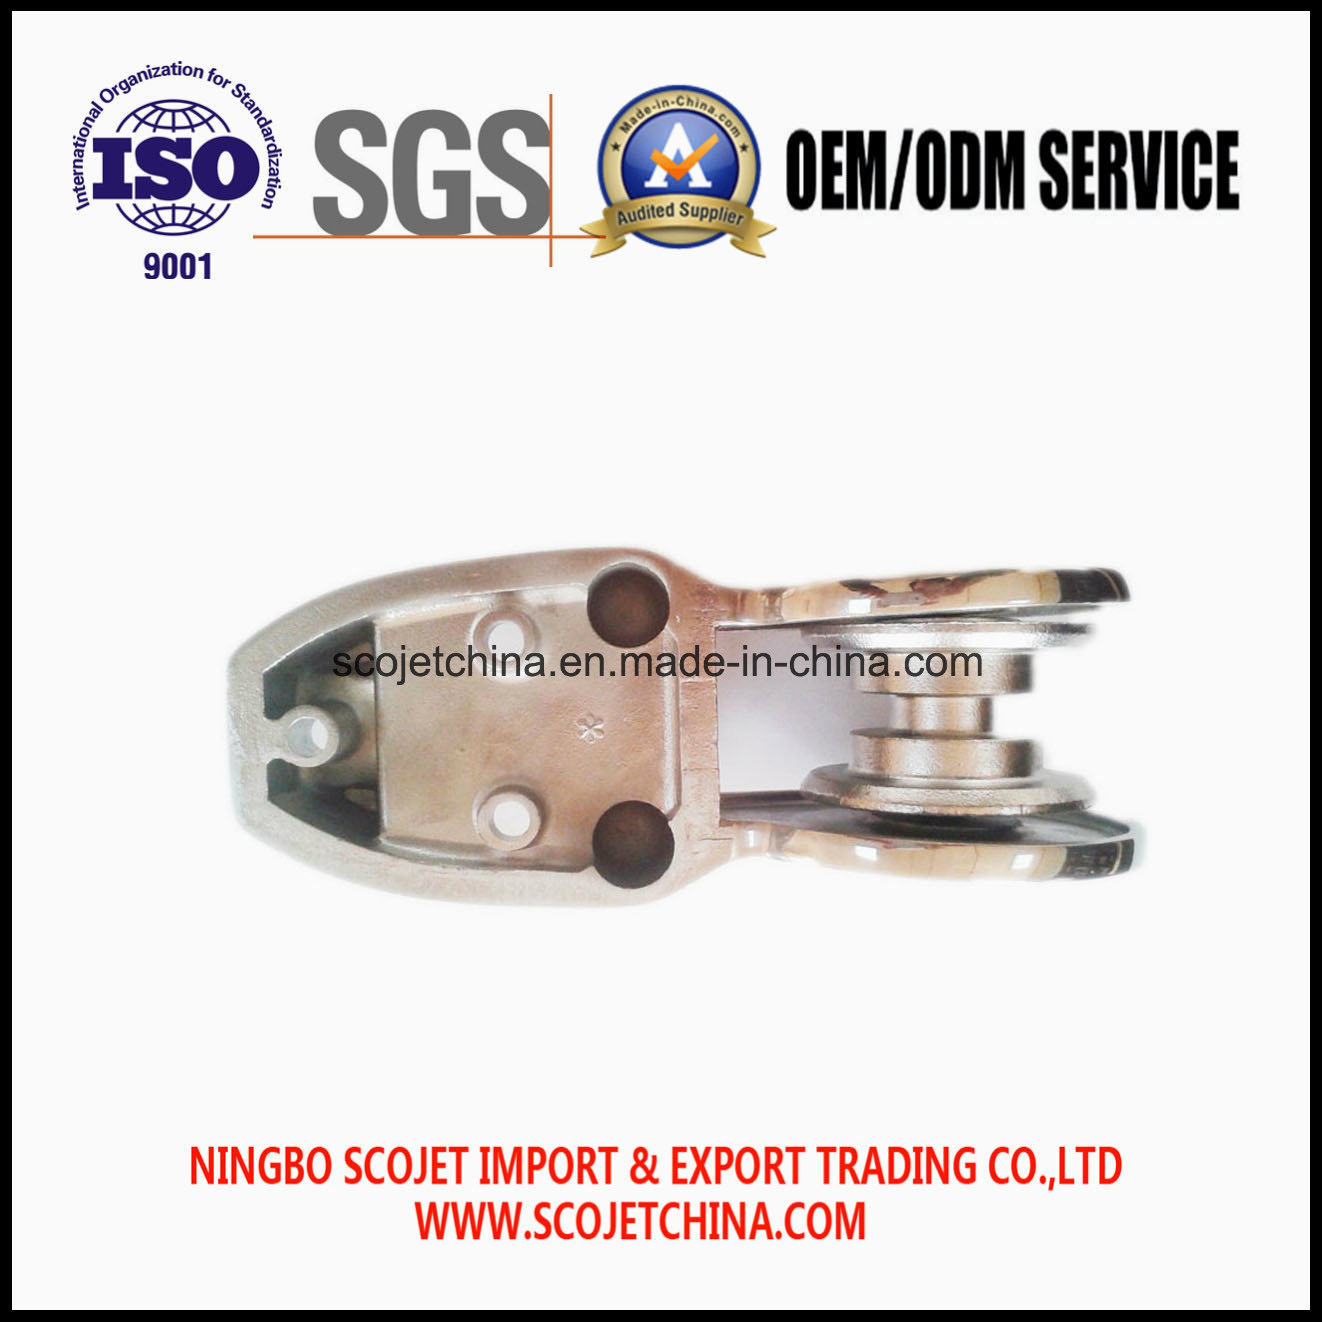 Customized Marine Hardware Made by Investment Casting